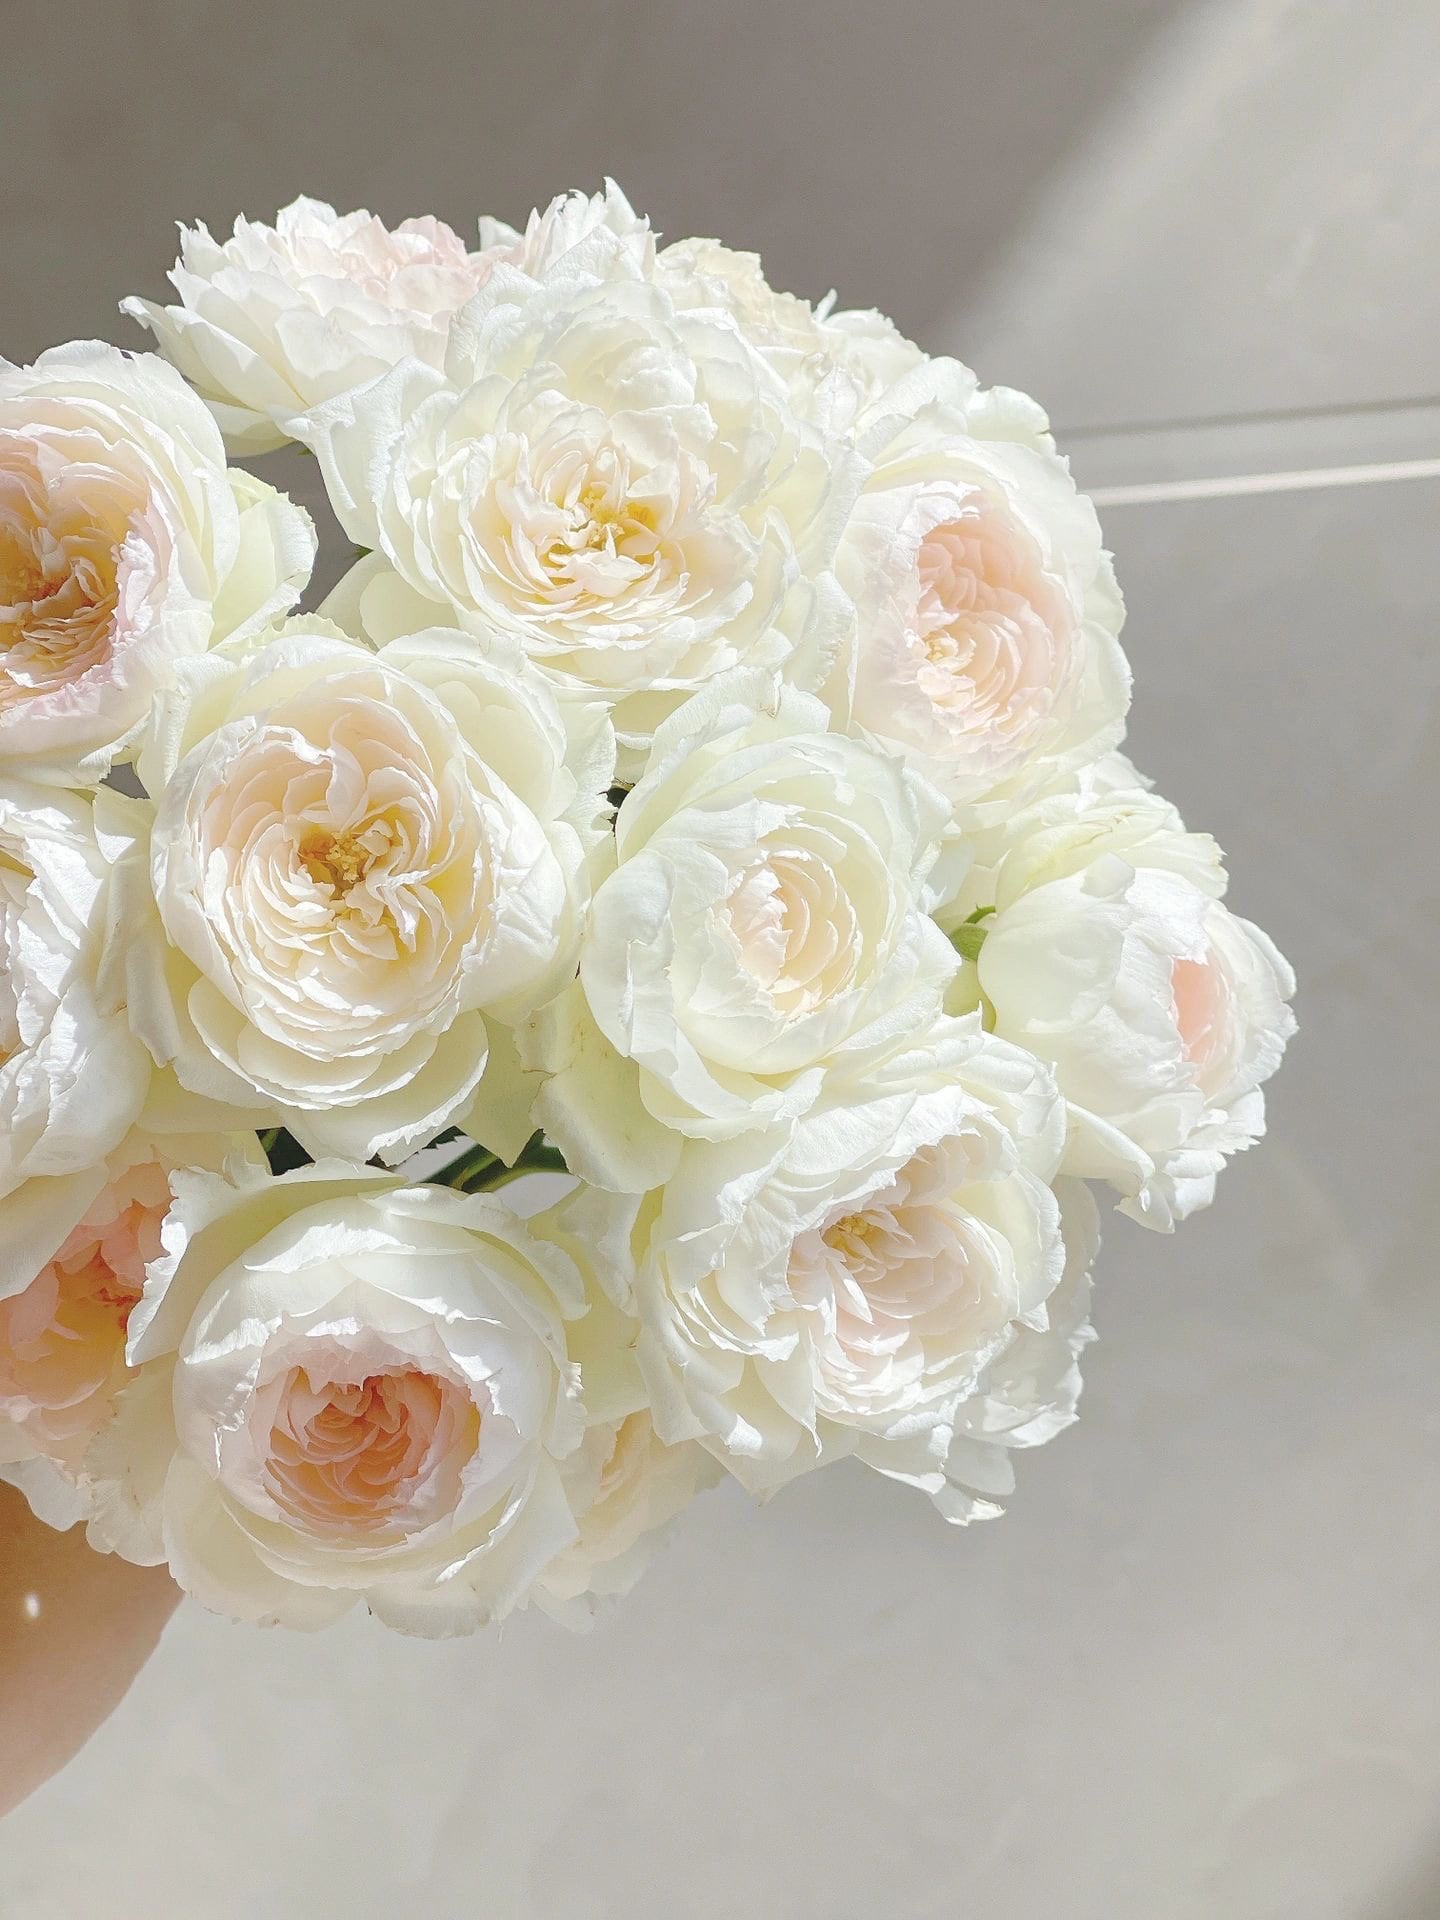 Rose【Lapin| ラパン 】-1.5 Gal Own Root Bare Root｜Rare Japanese Rosa| 木村卓功 | Long flowering period| Intense Fragrance| 小兔子| |Exquisite |Pearl